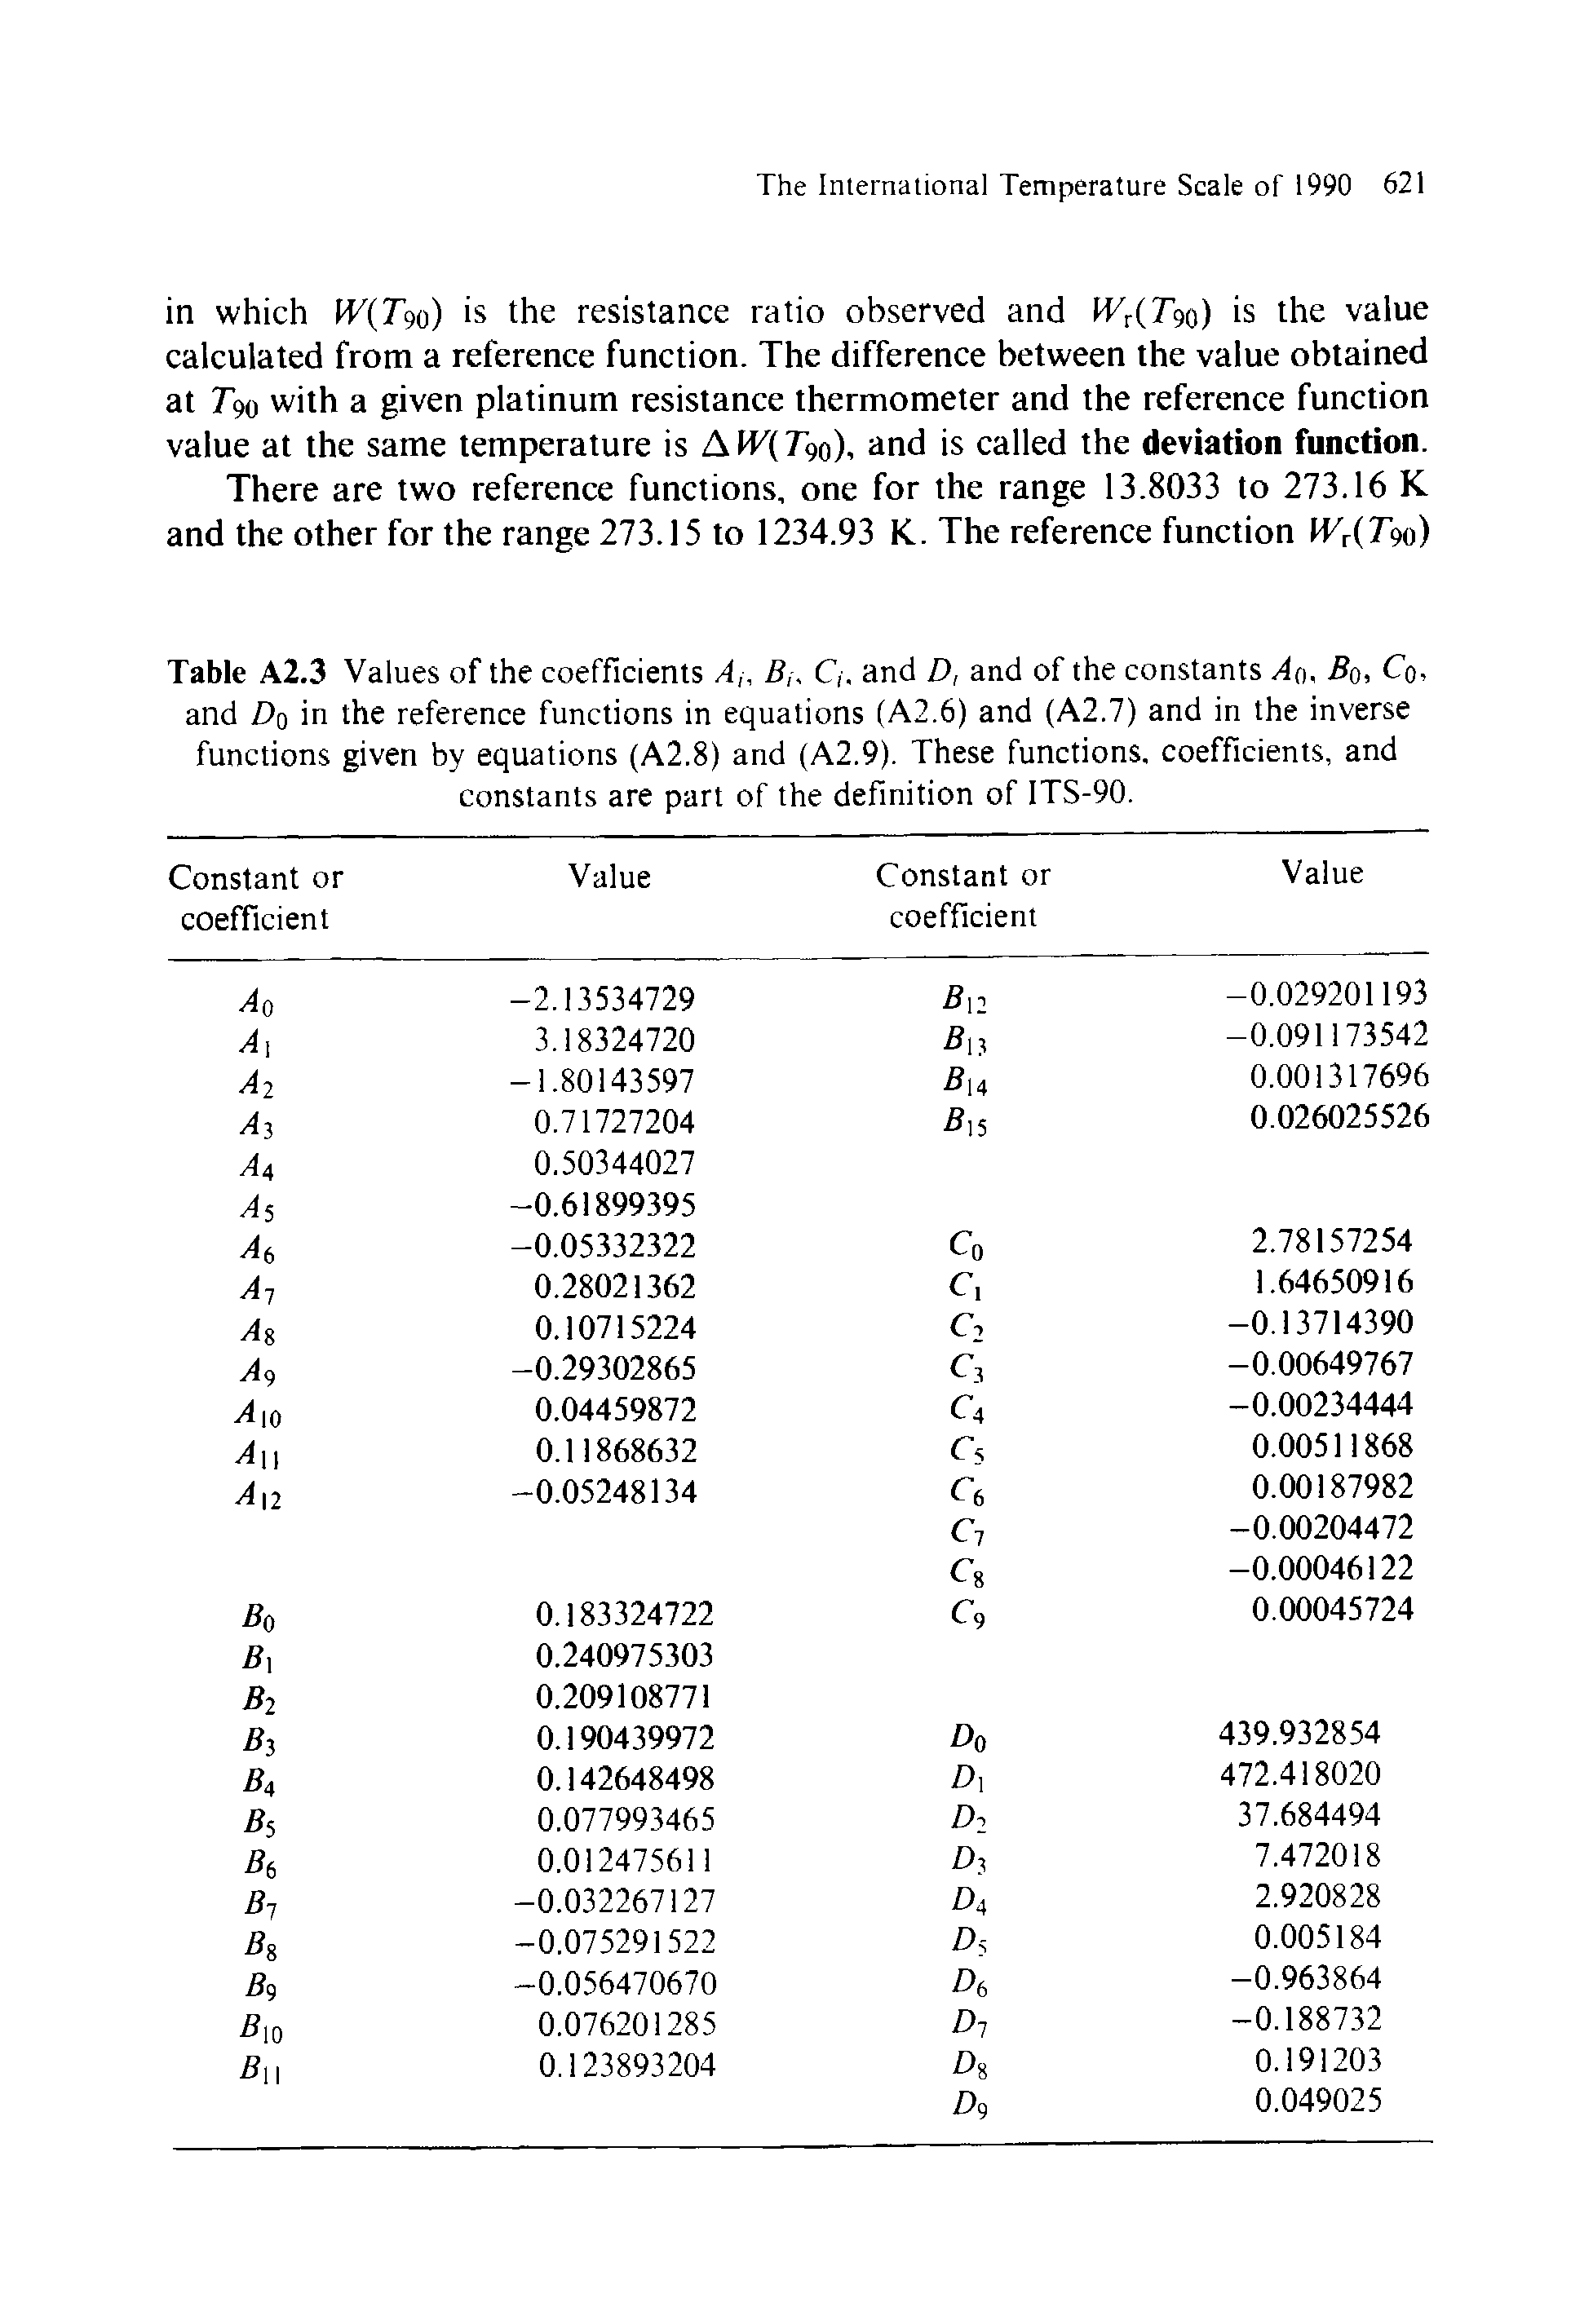 Table A2.3 Values of the coefficients A,-, B, Cand D, and of the constants A0, Bo, Co, and Do in the reference functions in equations (A2.6) and (A2.7) and in the inverse functions given by equations (A2.8) and (A2.9). These functions, coefficients, and constants are part of the definition of ITS-90.